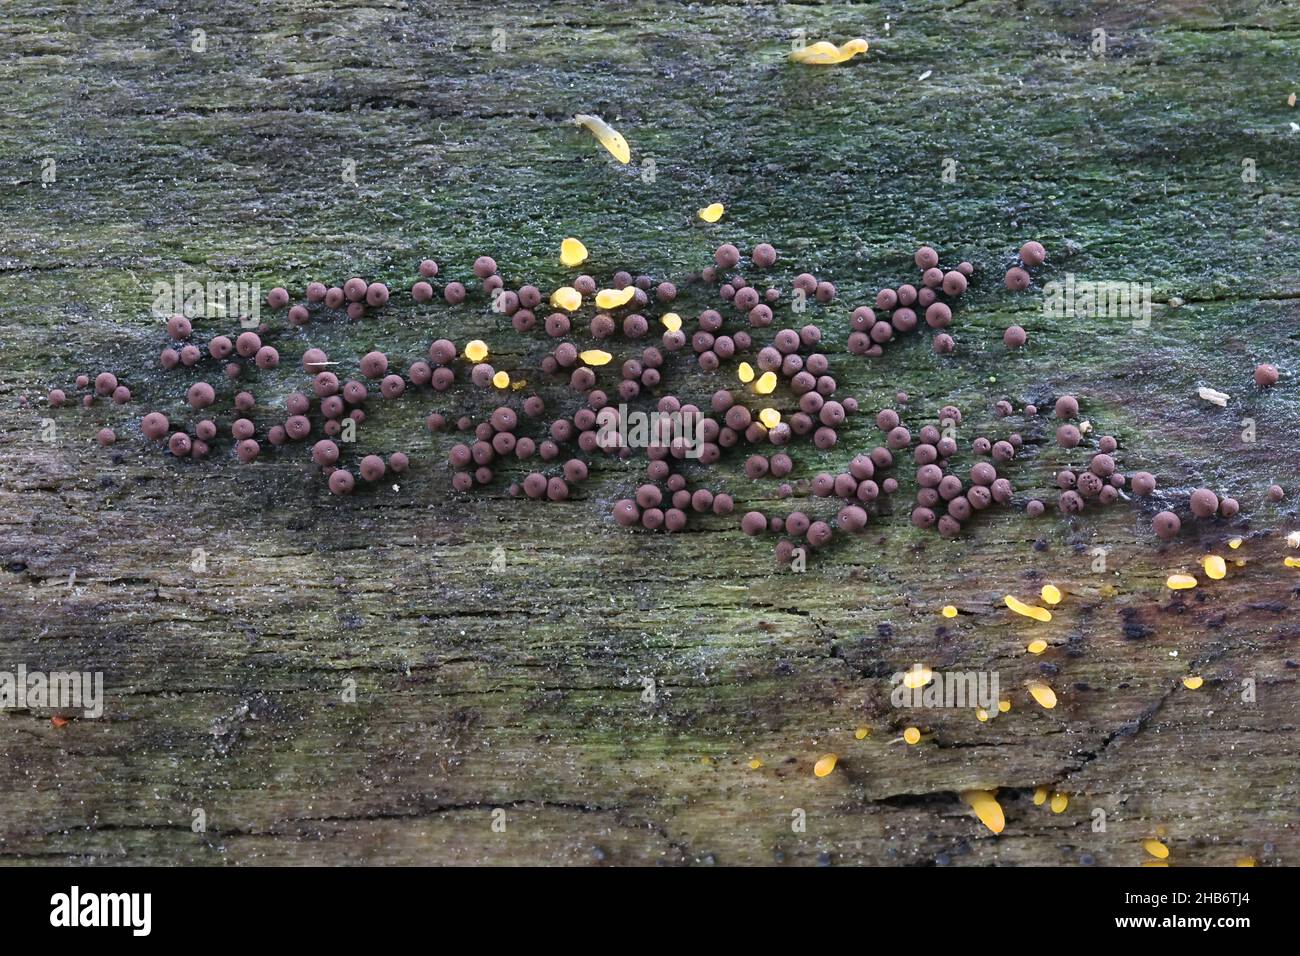 Enerthenema papillatum, a slime mold from Finland with no common english name Stock Photo